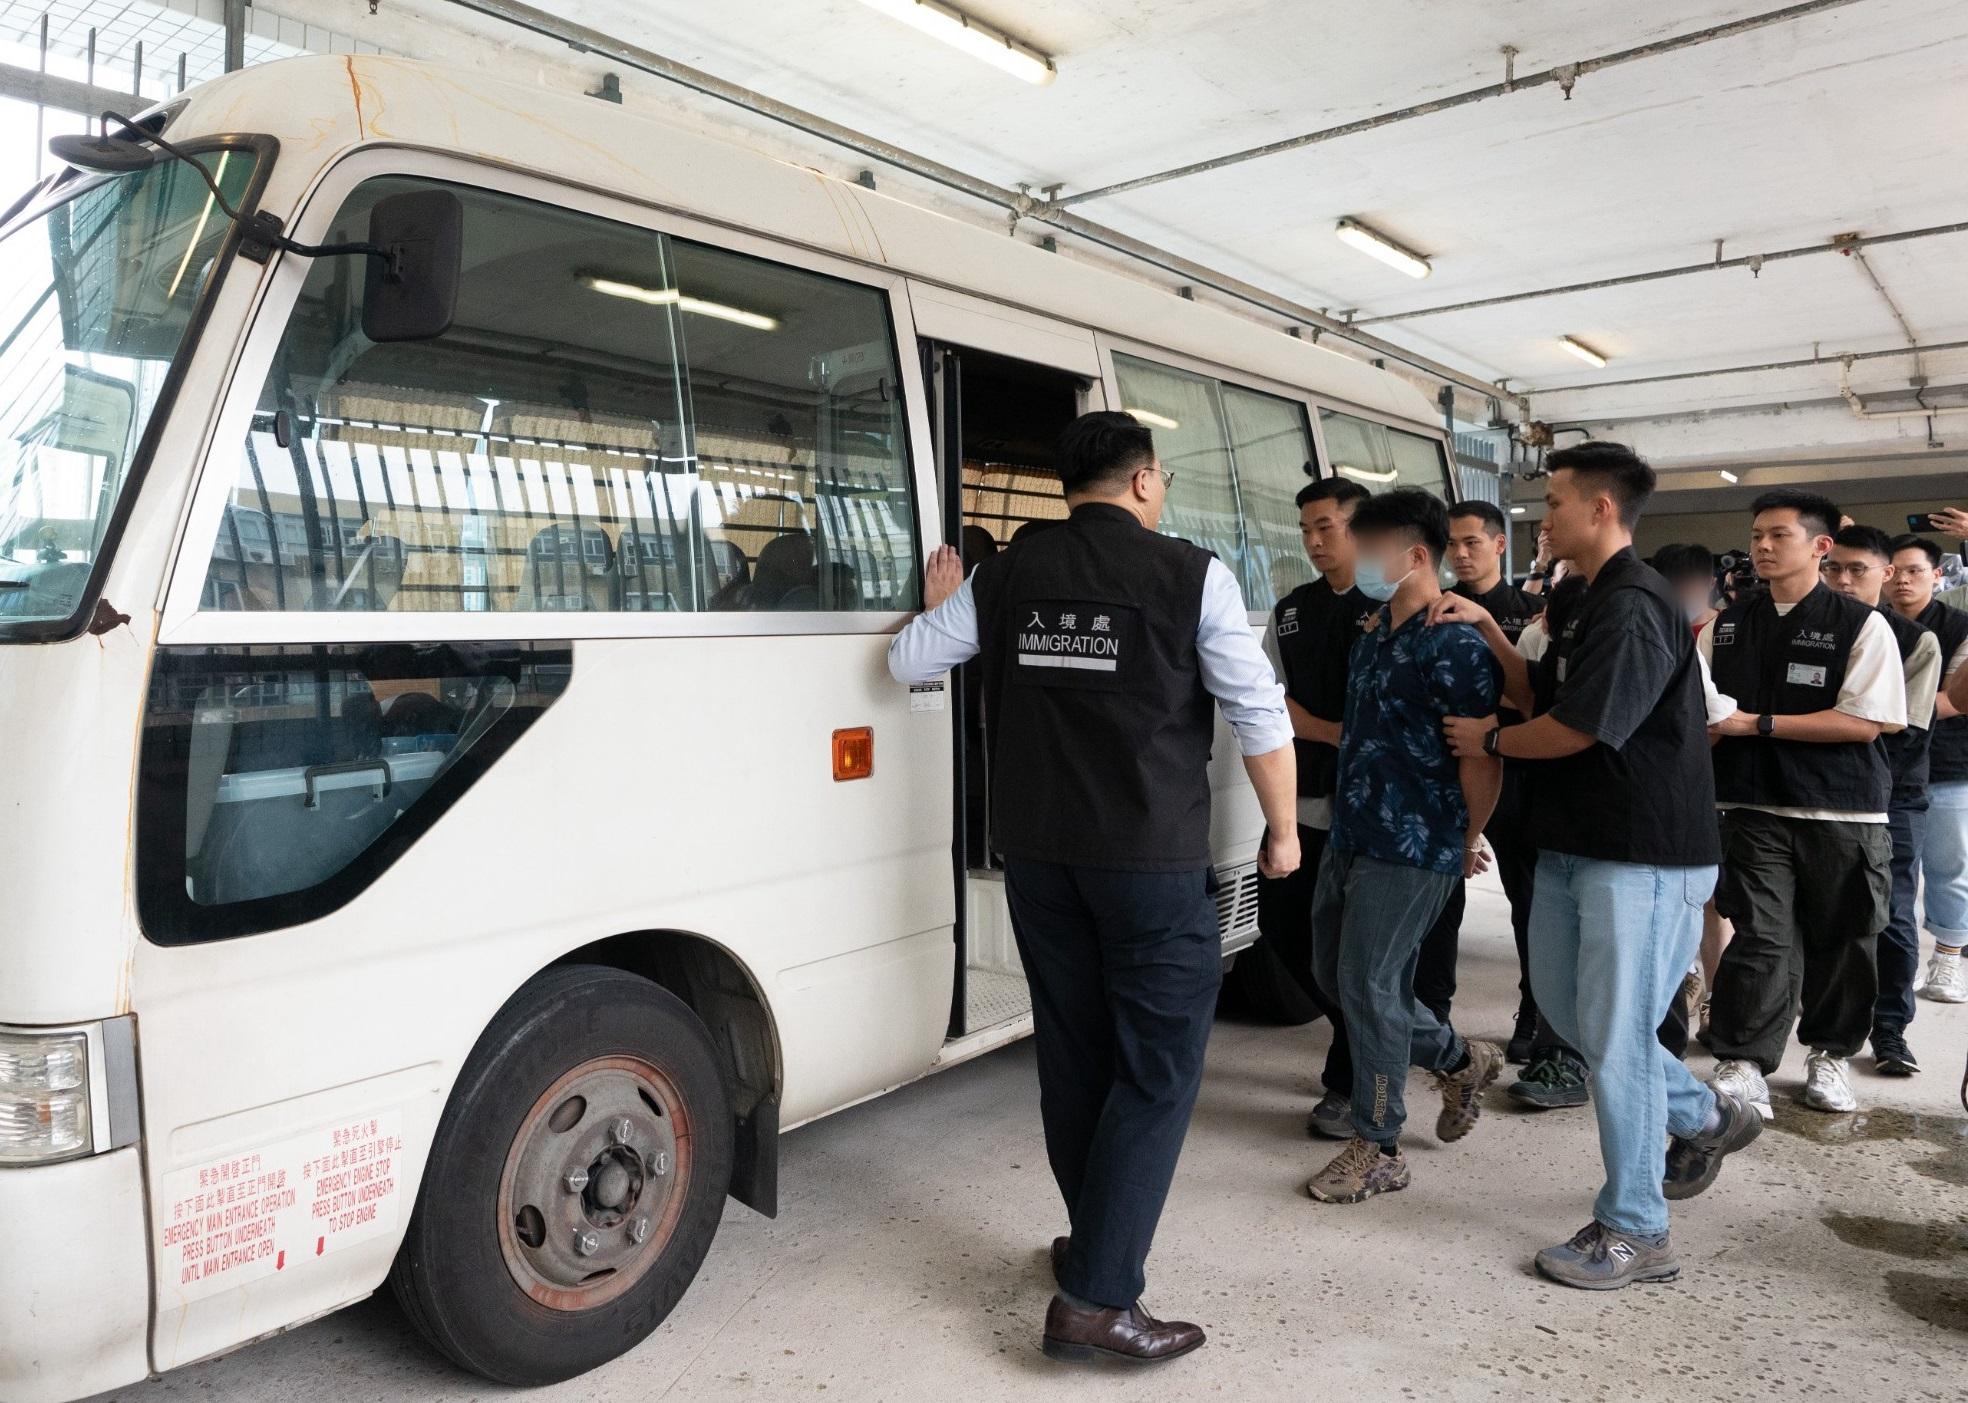 The Immigration Department mounted an anti-illegal worker operation codenamed "Netstrike" today (June 3). Photo shows illegal workers arrested during the operation.